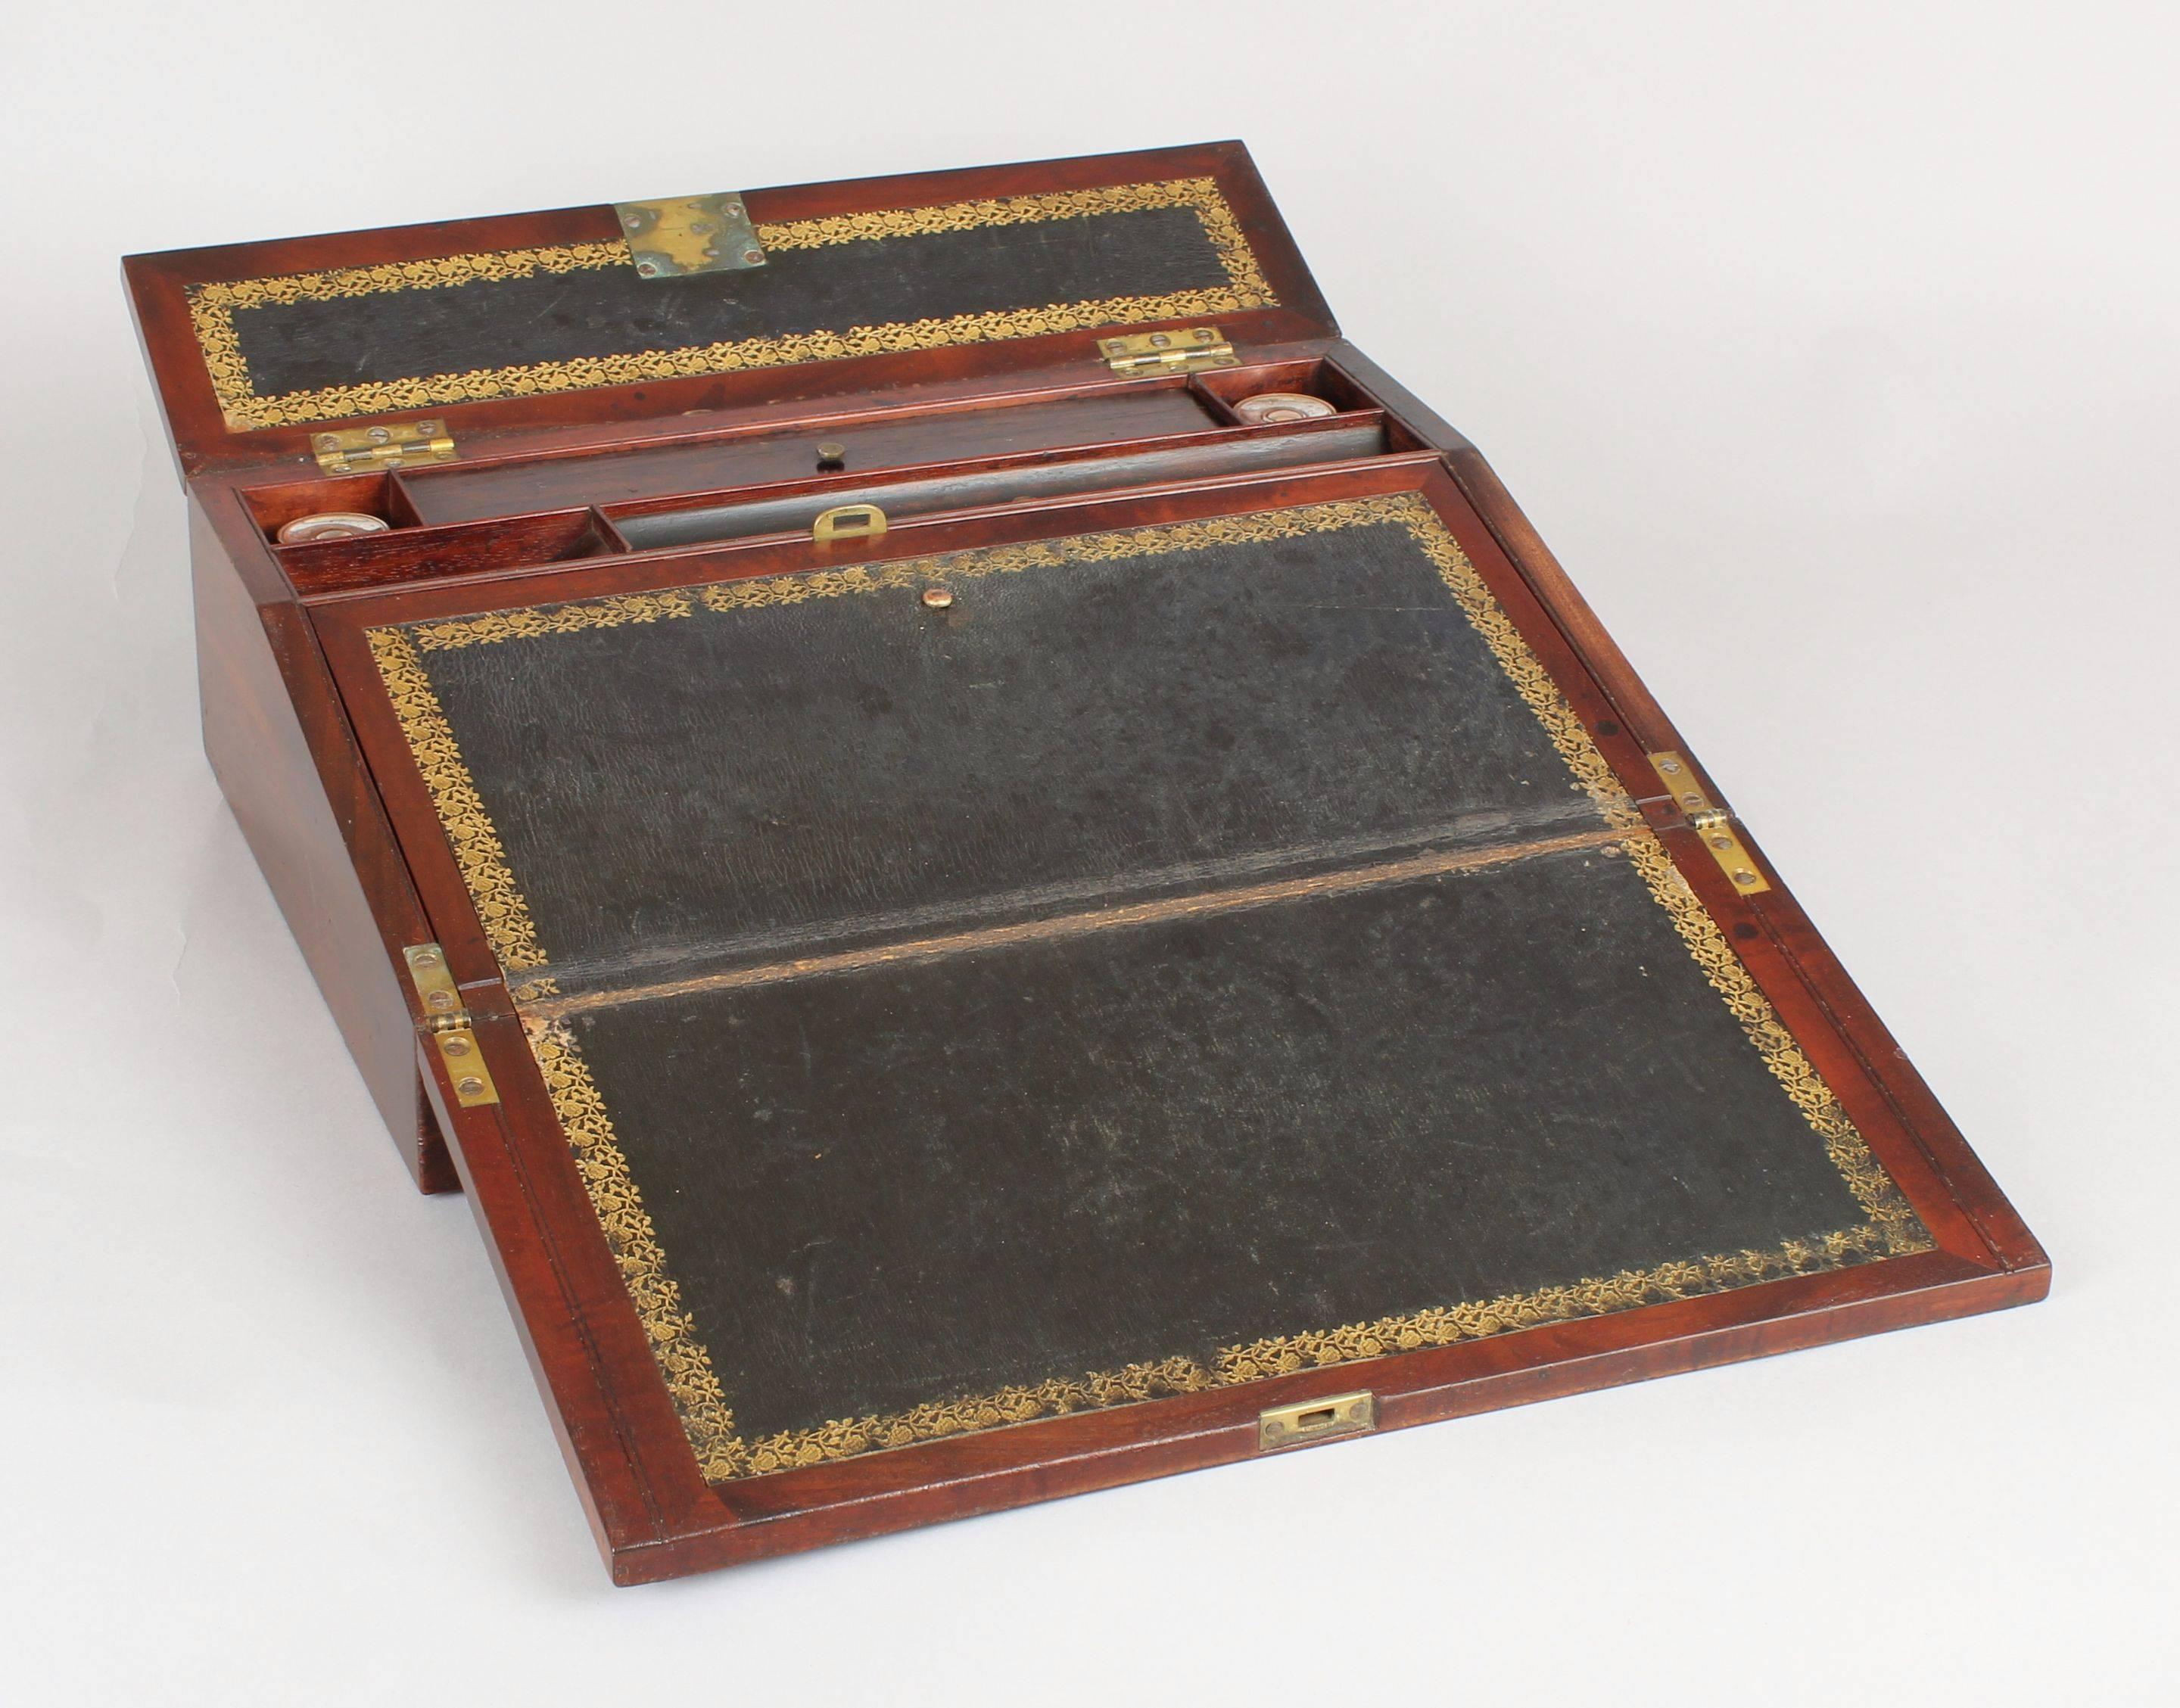 William IV period mahogany lap-desk; the hinged lid and writing-slope inlaid with cut-brass borders and a flush-fitting handle; the desk with original gold-tooled green leather flaps enclosing two pen-boxes, a nib-slop and a pair of inkwells with